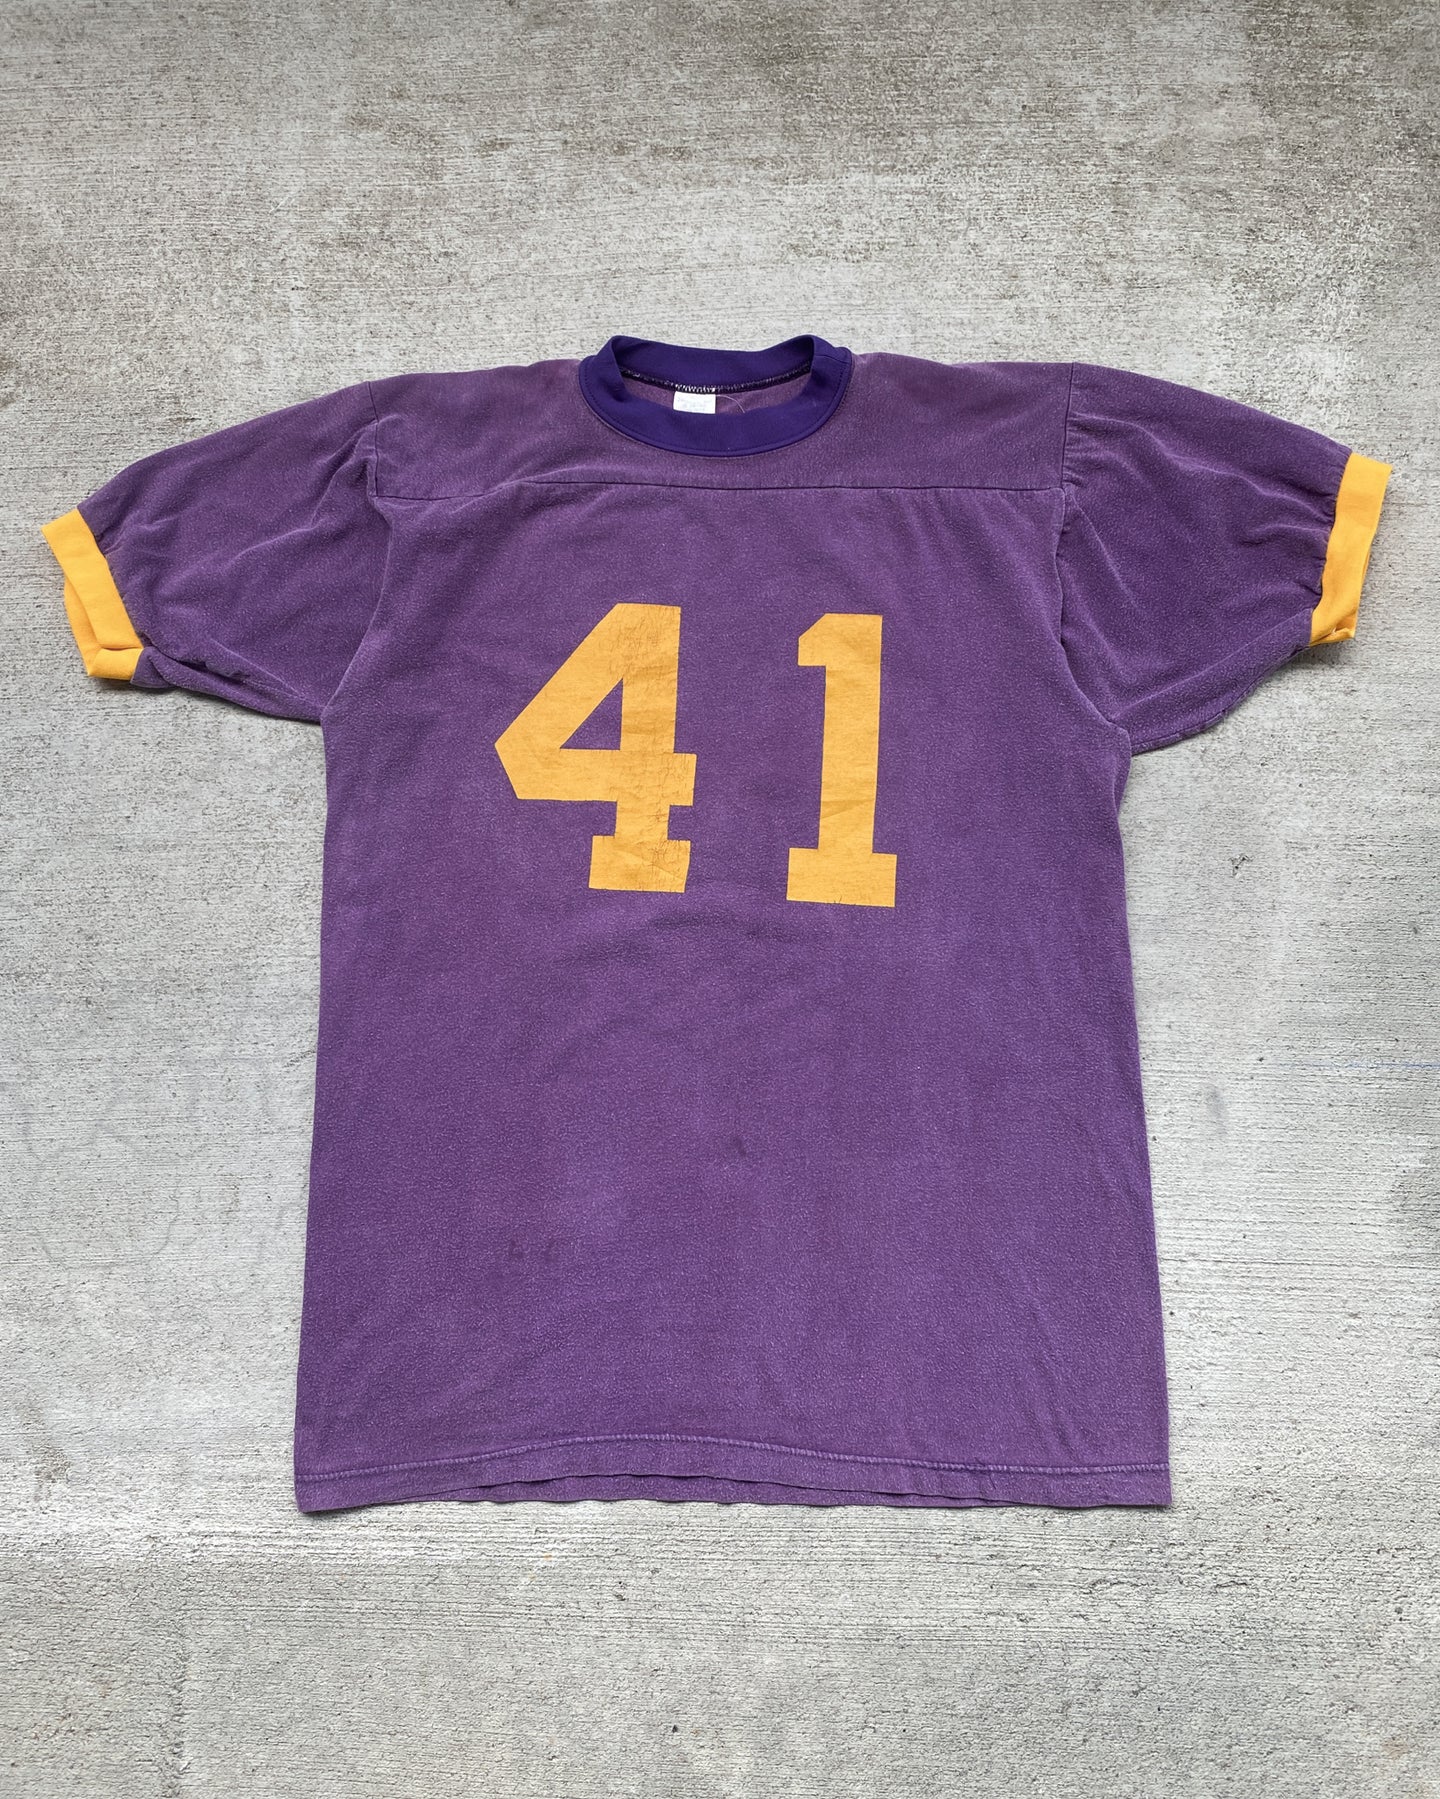 1970s Violet Football Jersey Shirt - Size Large